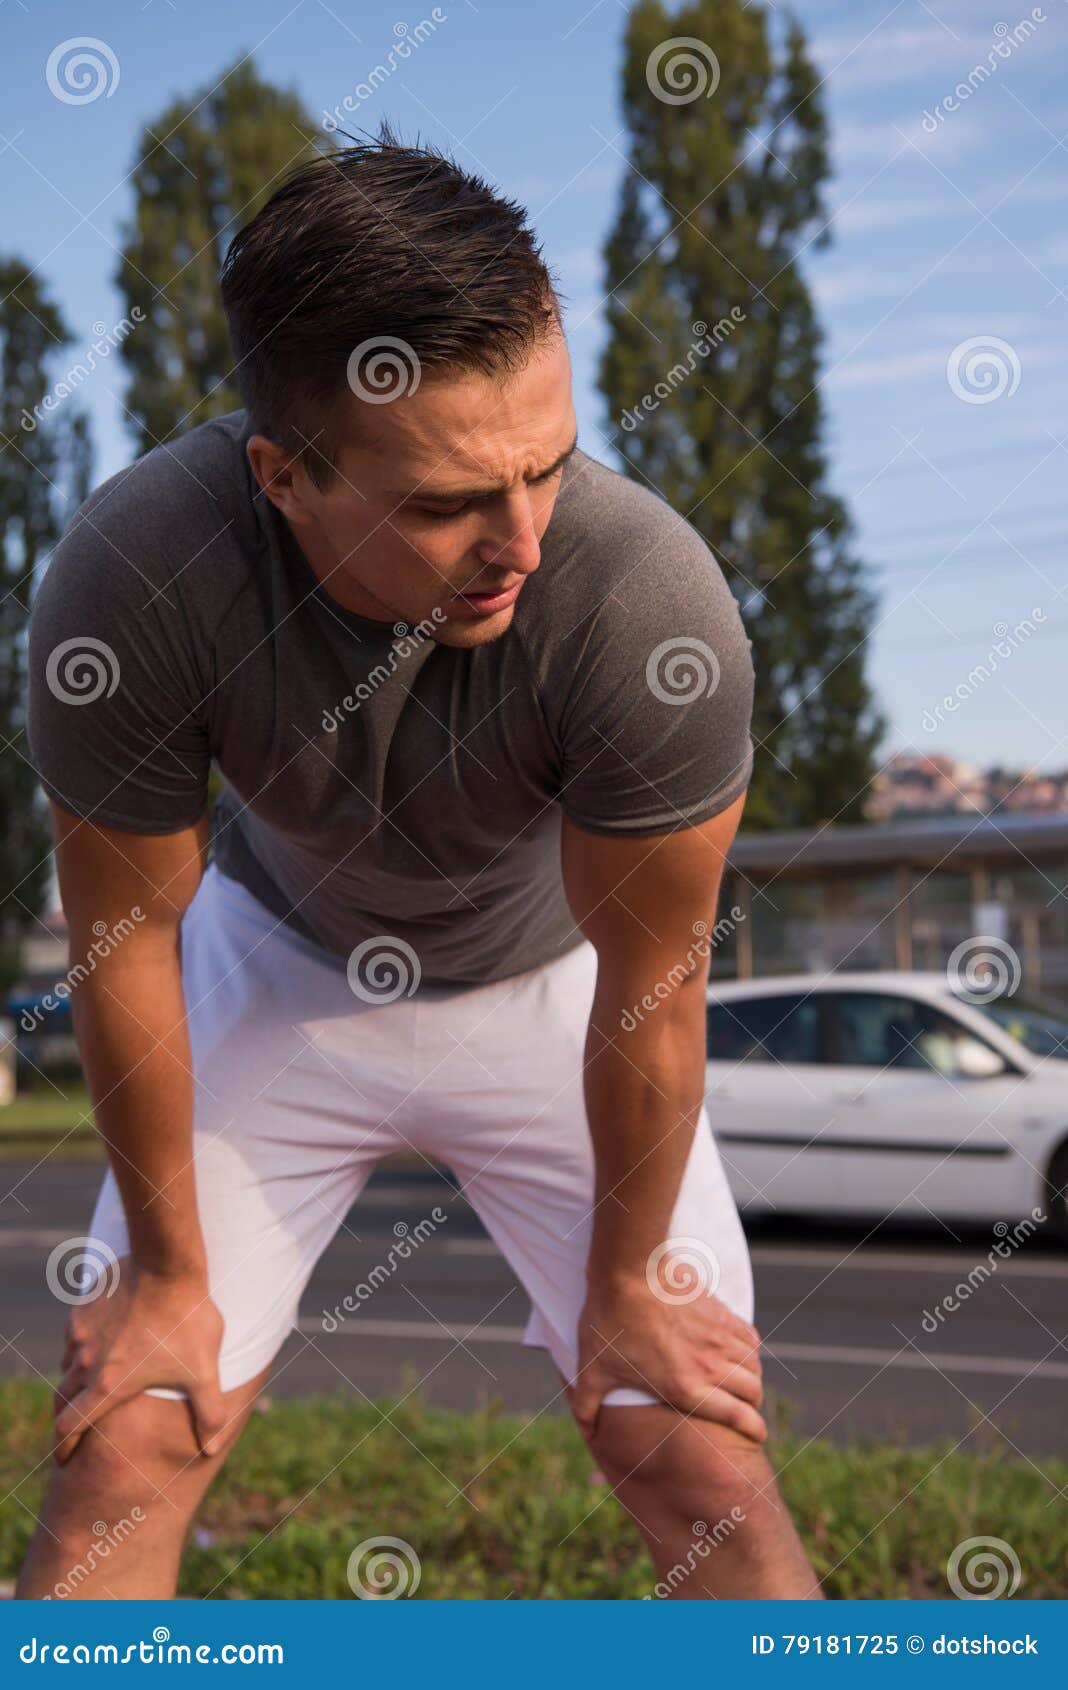 Portrait of a Young Man on Jogging Stock Image - Image of outdoor ...